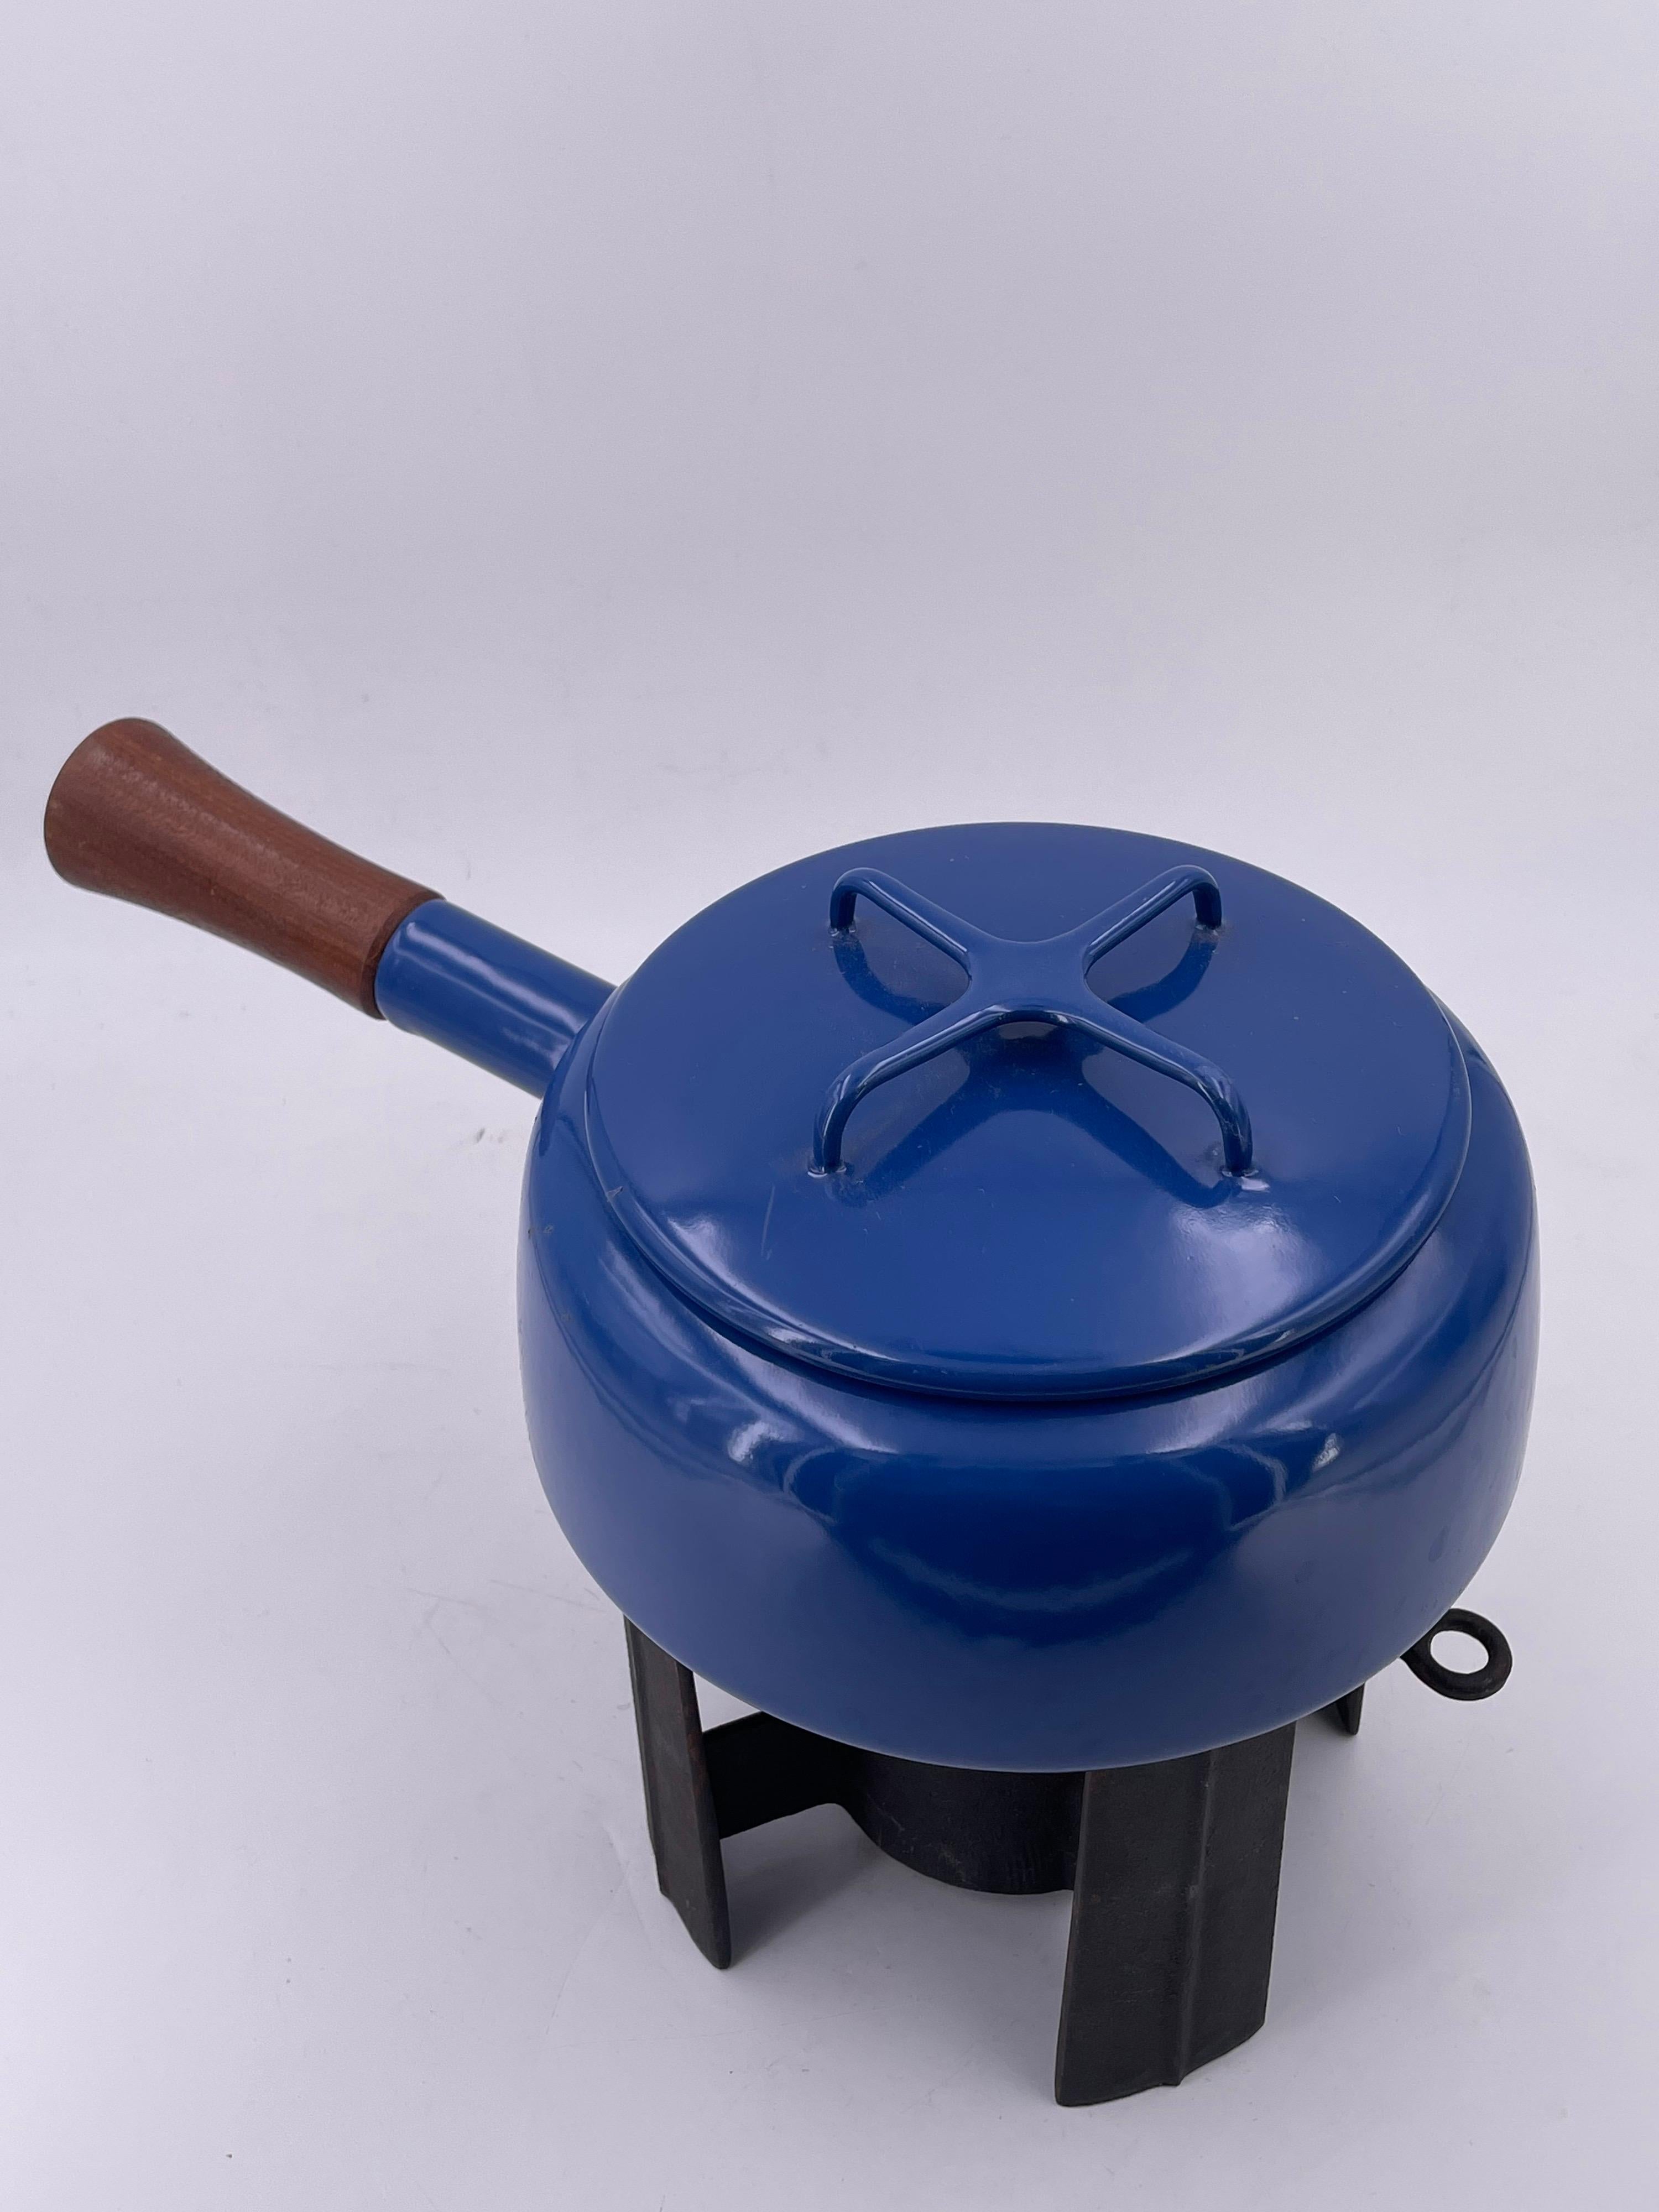 Beautiful, unique, very nice and clean, 1950s fondue pot, in red enameled finish with white interior, cast iron base and solid teak handle. Excellent condition. A small flea bite around the lid as shown, designed by Quistgaard and produced by Dansk.